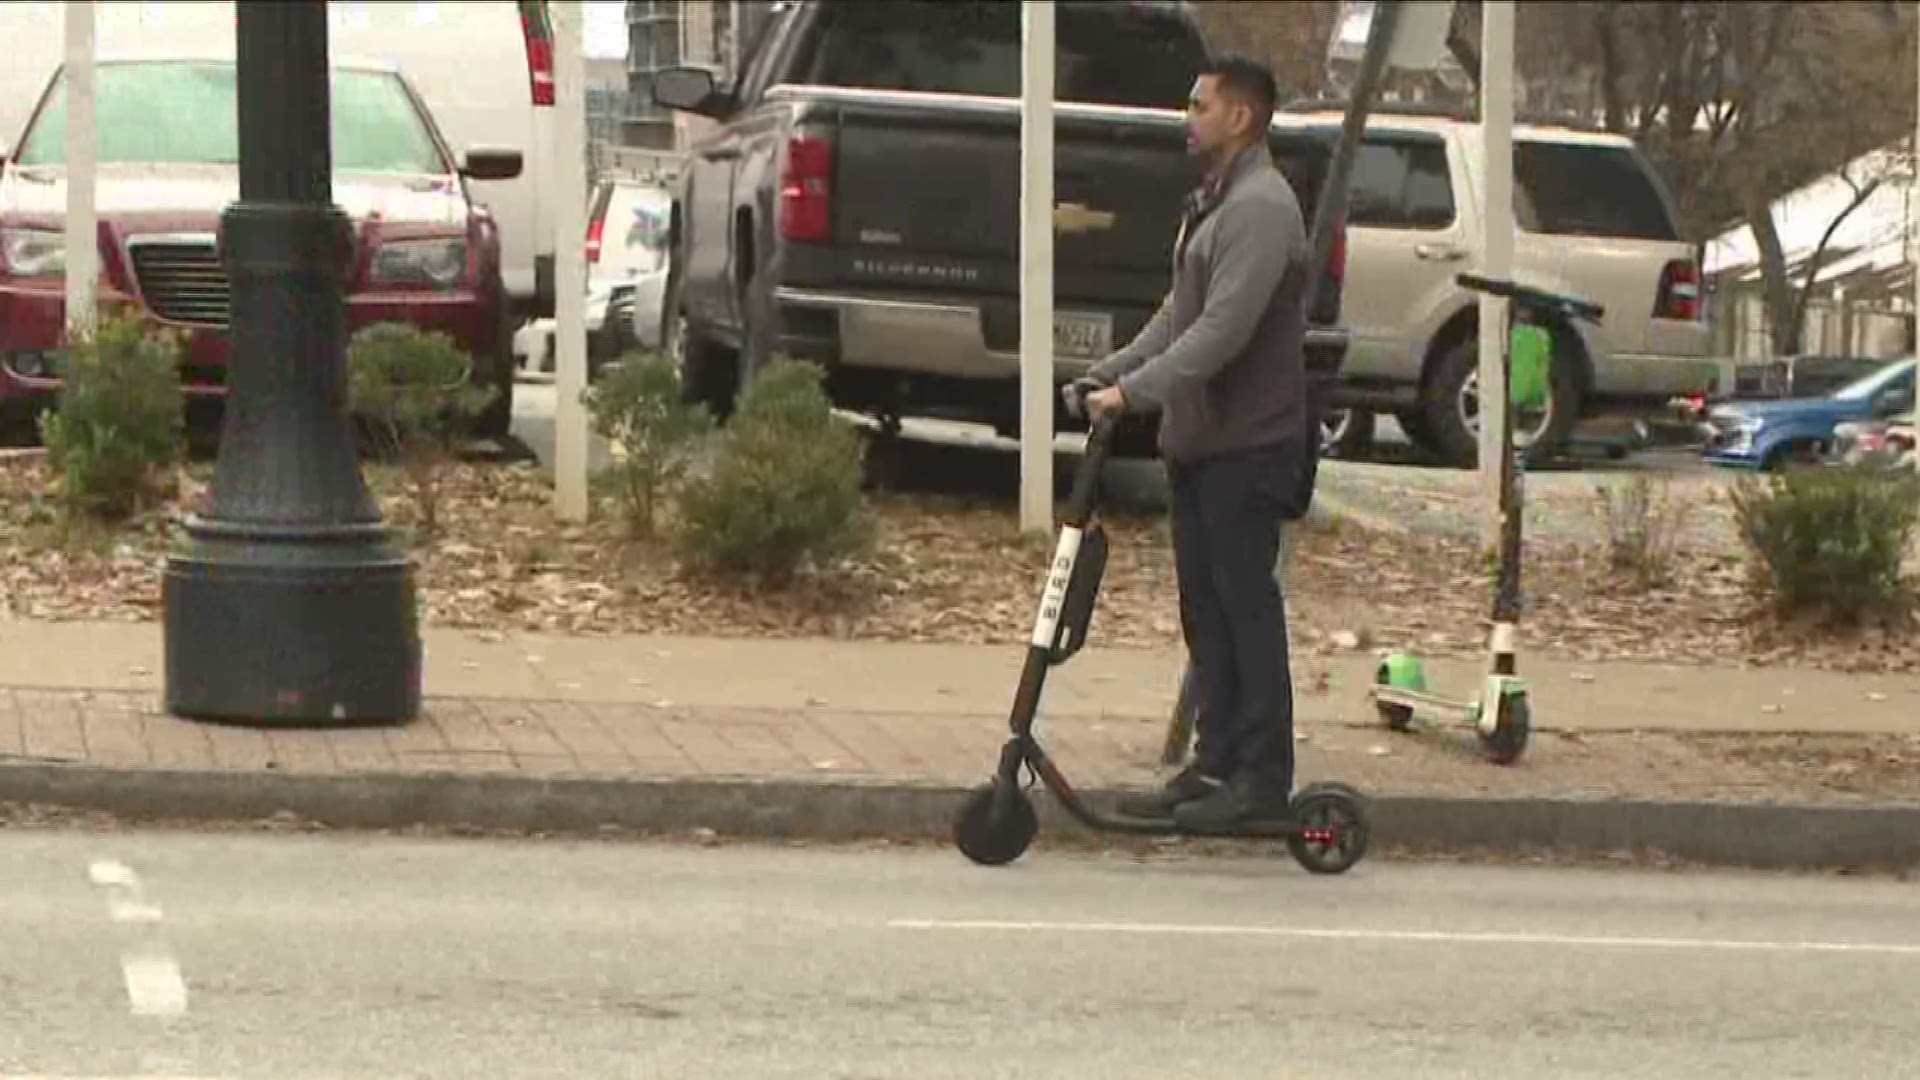 Grady Memorial Hospital said about 25 people visit its emergency room every month due to accidents involving rideshare scooters.